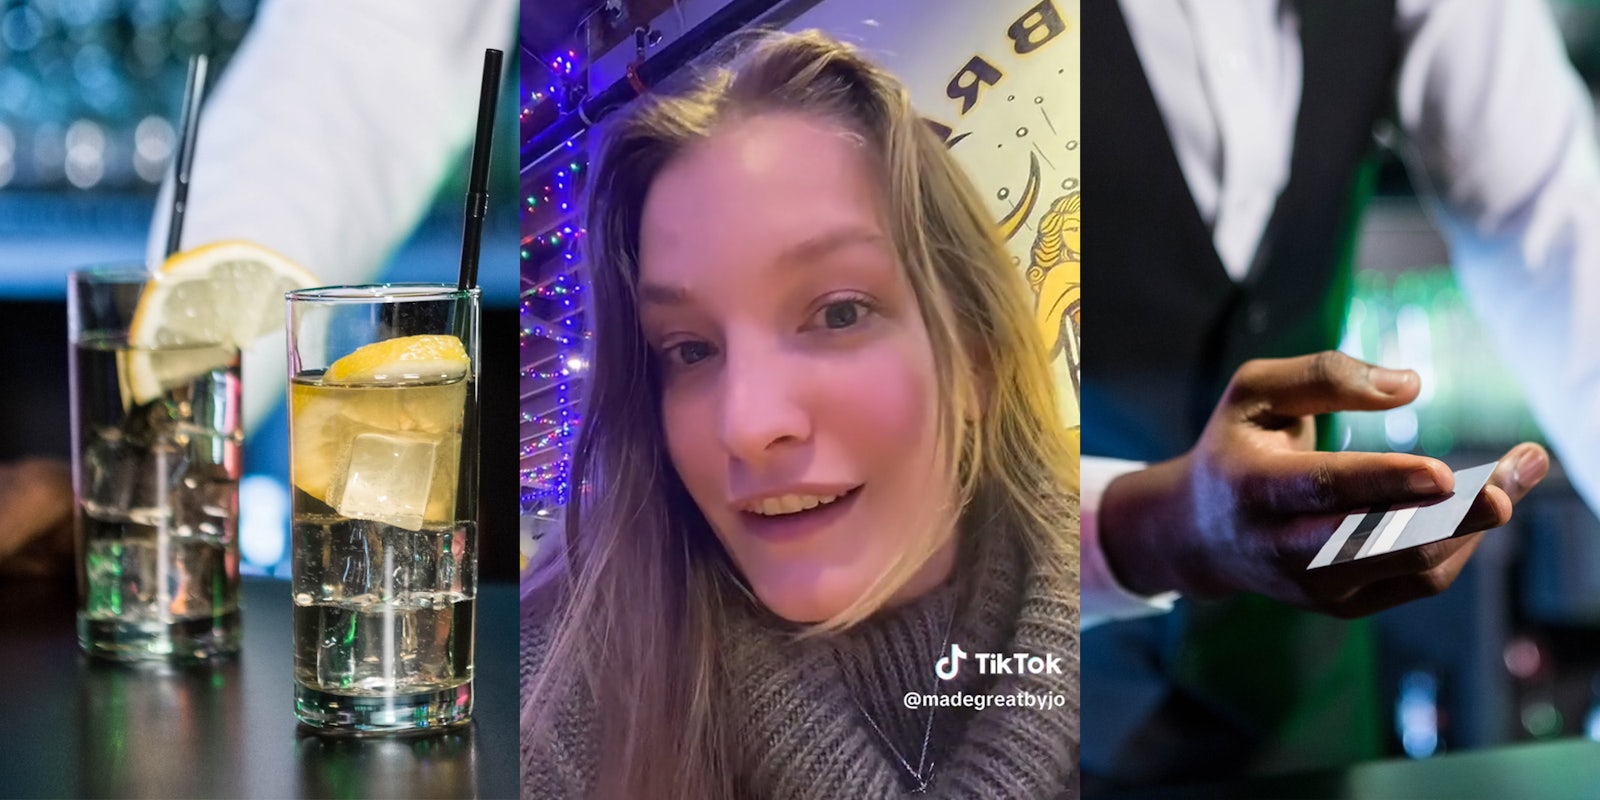 drinks on bar (l) young woman (c) bartender handing back credit card (r)